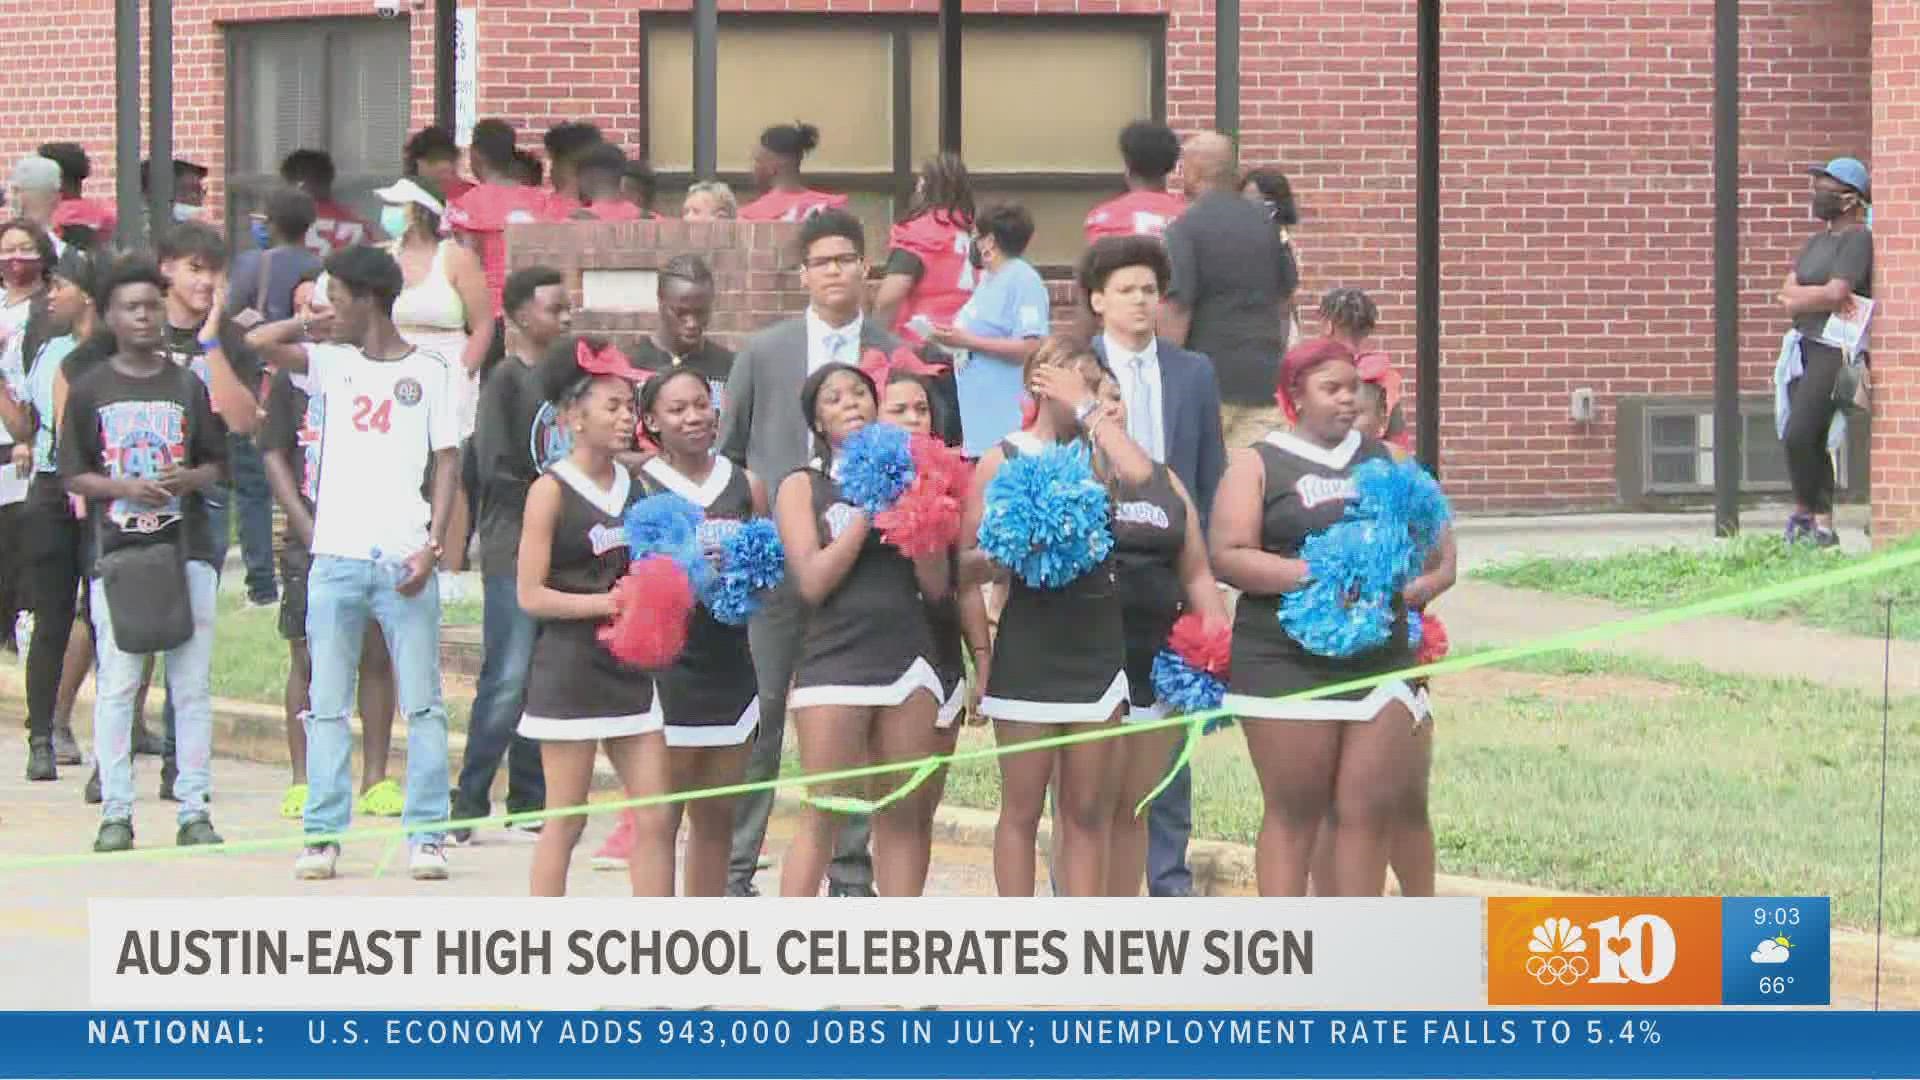 AustinEast High School community gathers for ceremonial lighting of